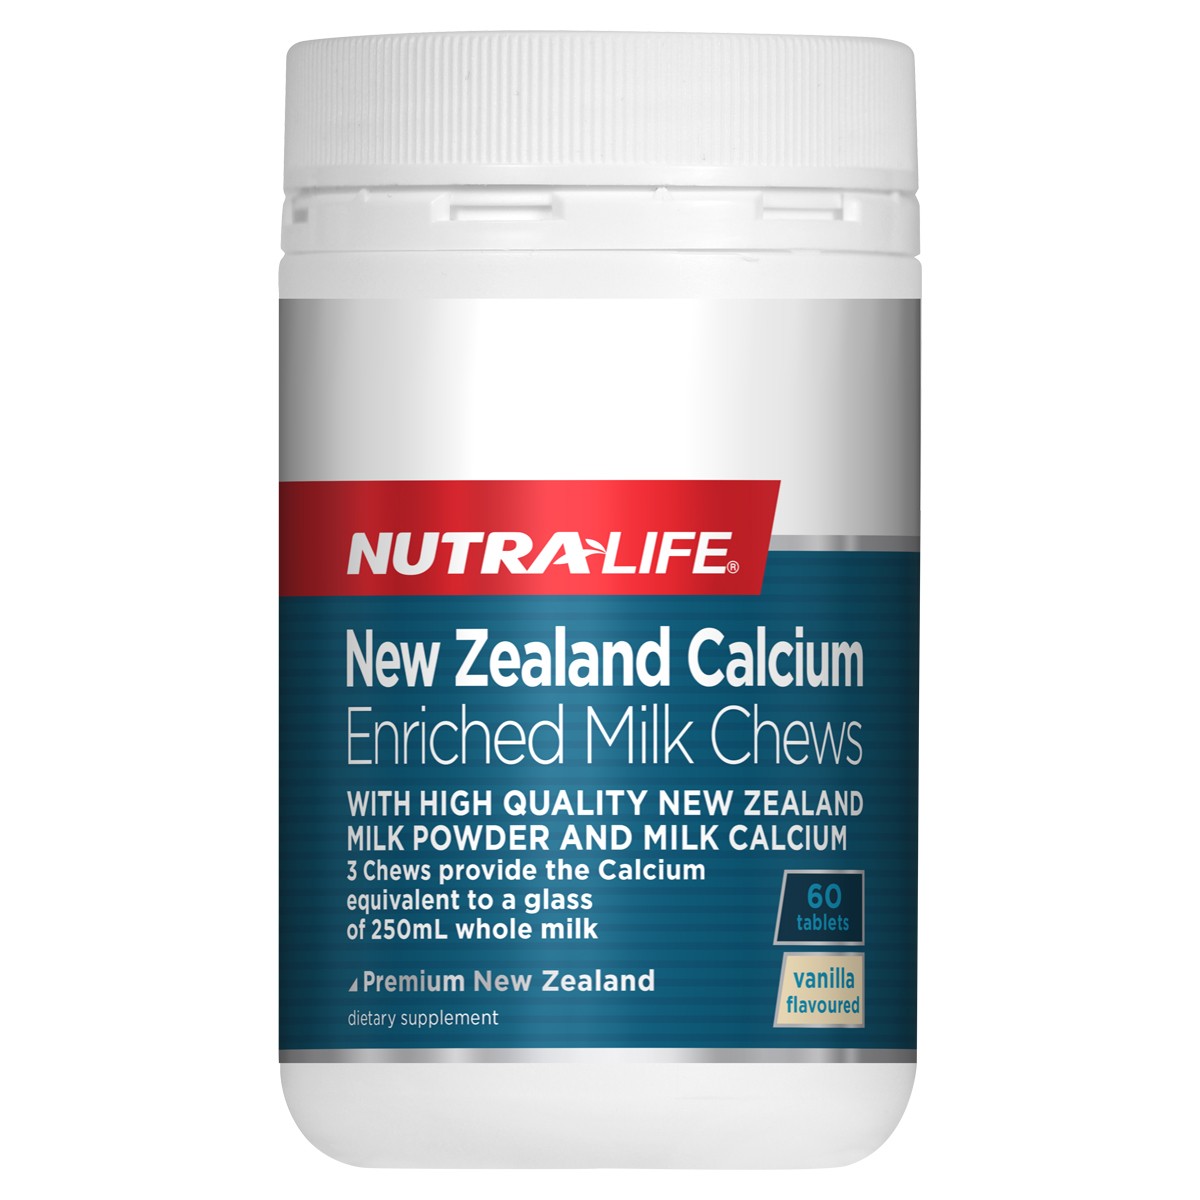 Nutra-Life New Zealand Calcium Enriched Milk Chews 